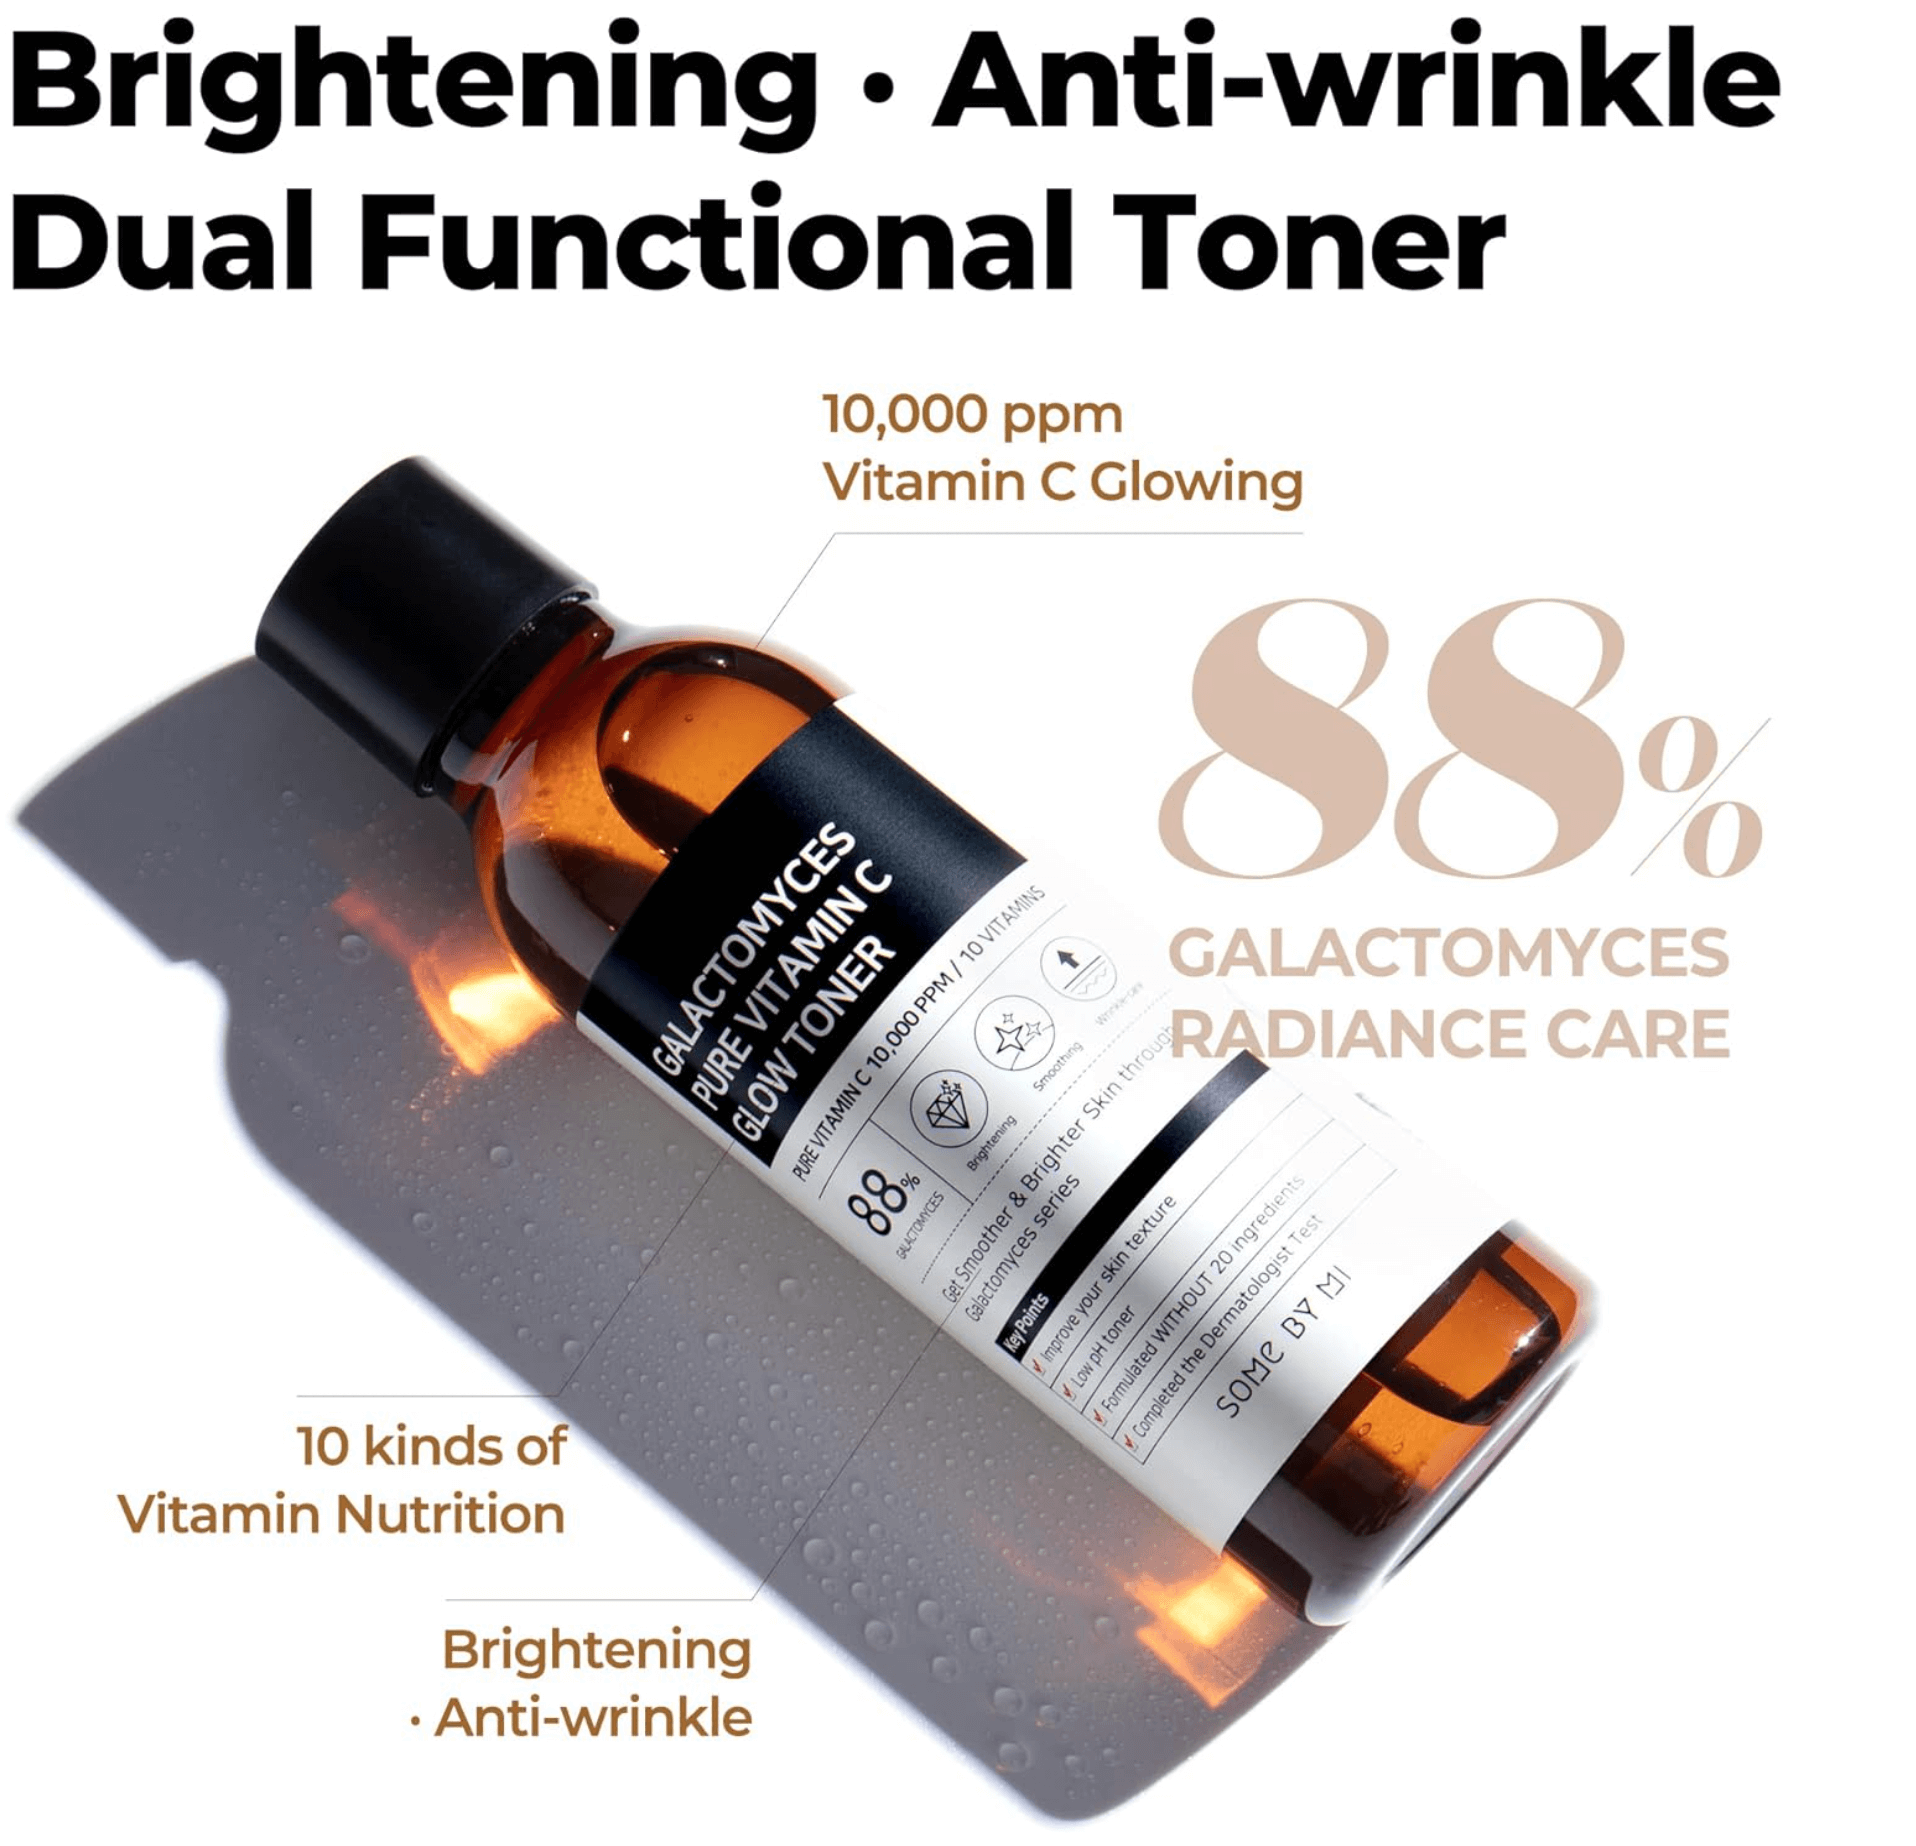 Some By Mi Galactomyces Pure Vitamin C Glow Toner Some by Mi